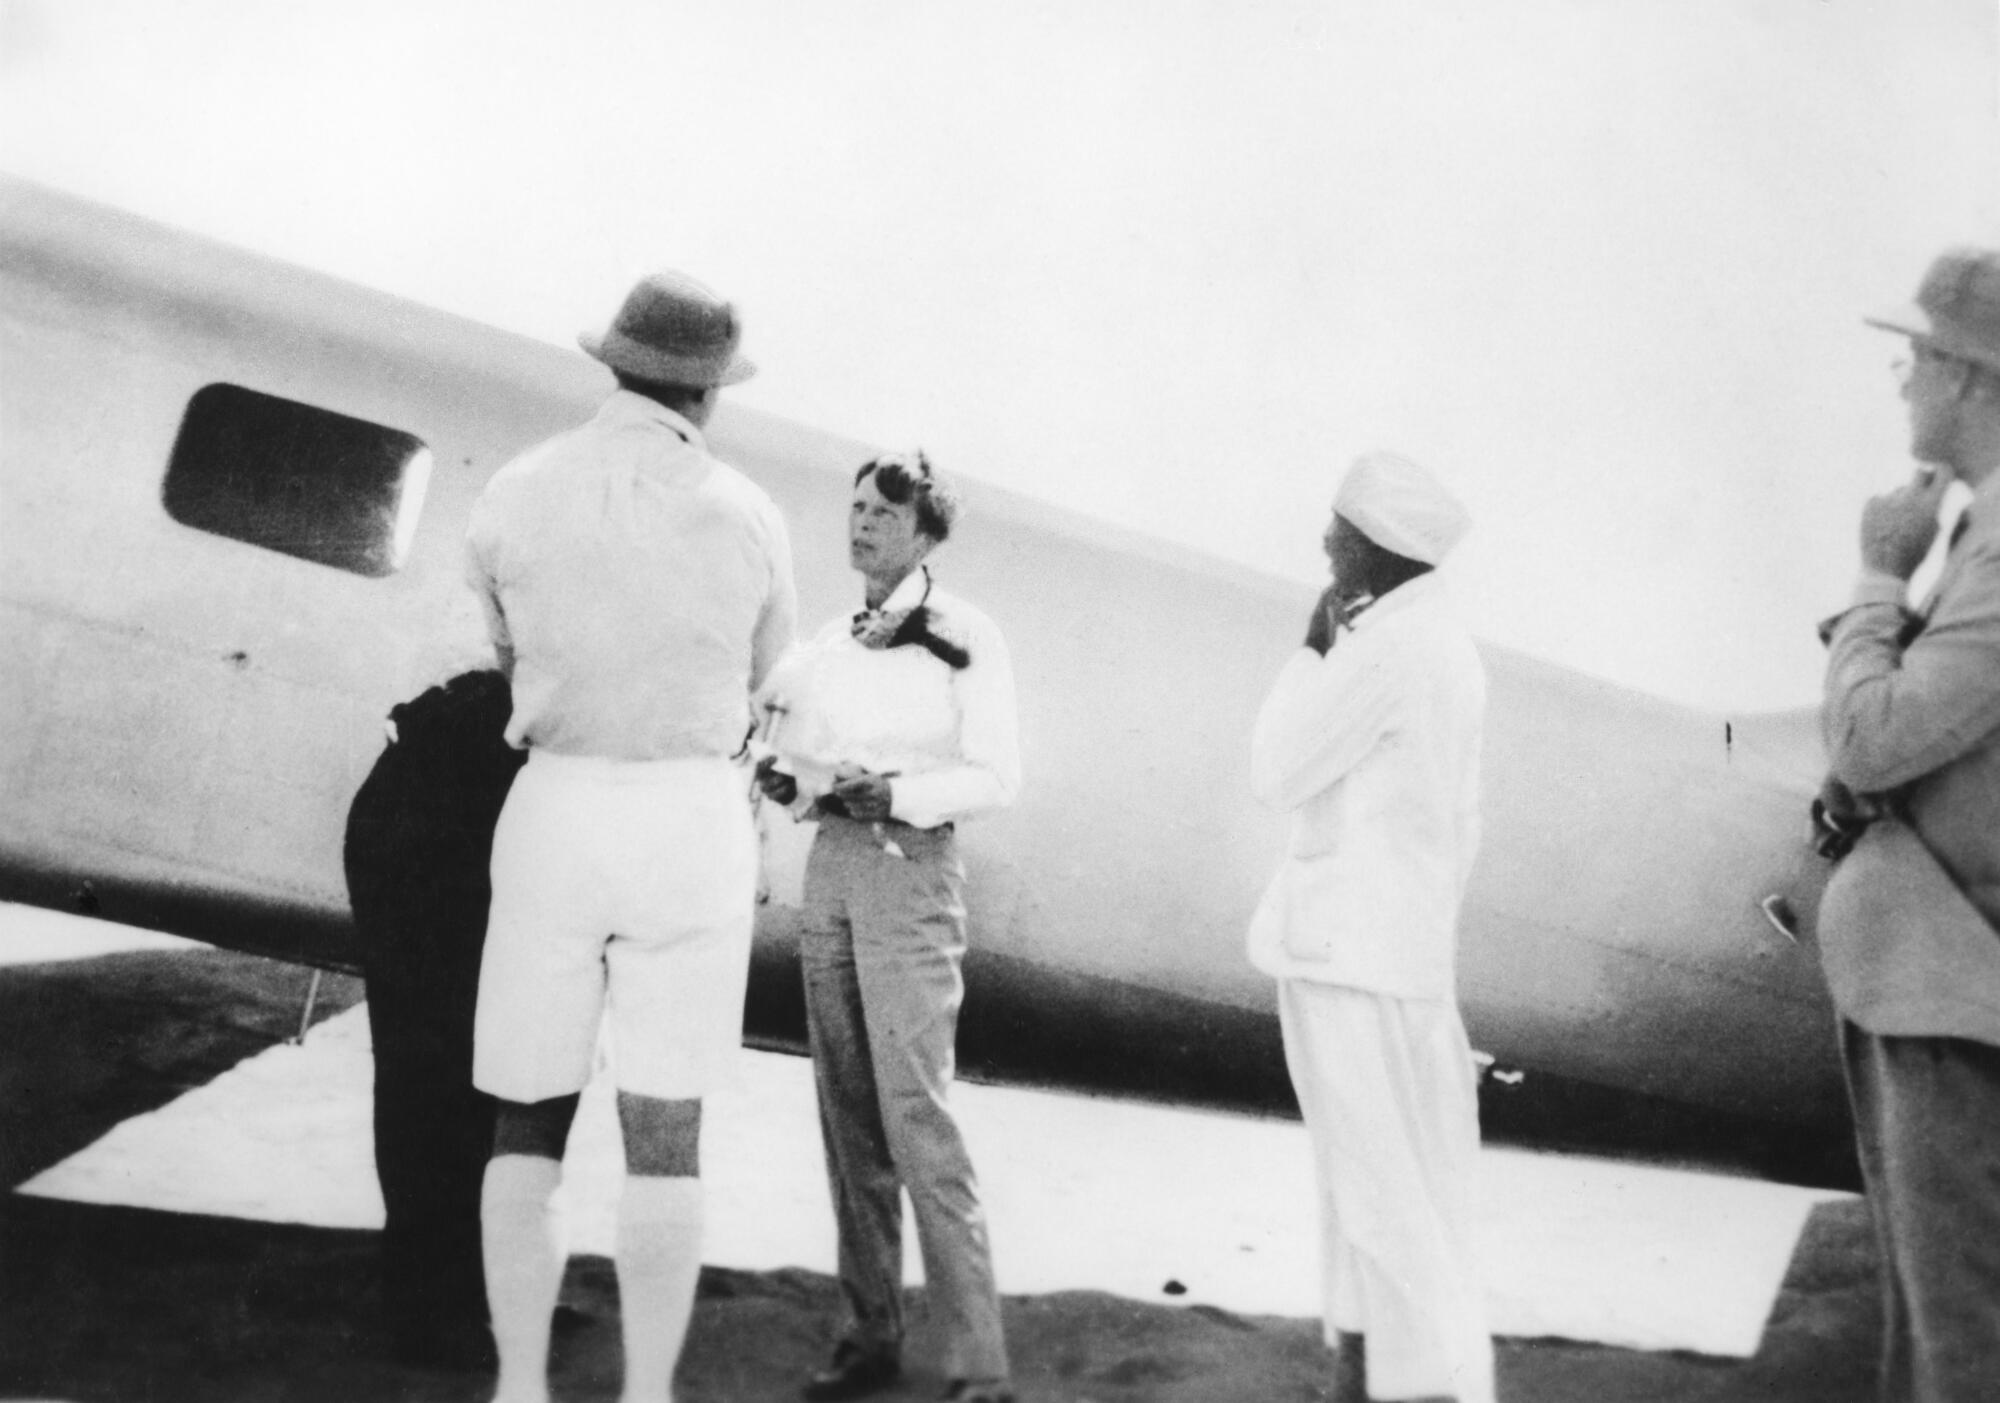 Amelia Earhart stands near an airplane fuselage with men in pith helmets.